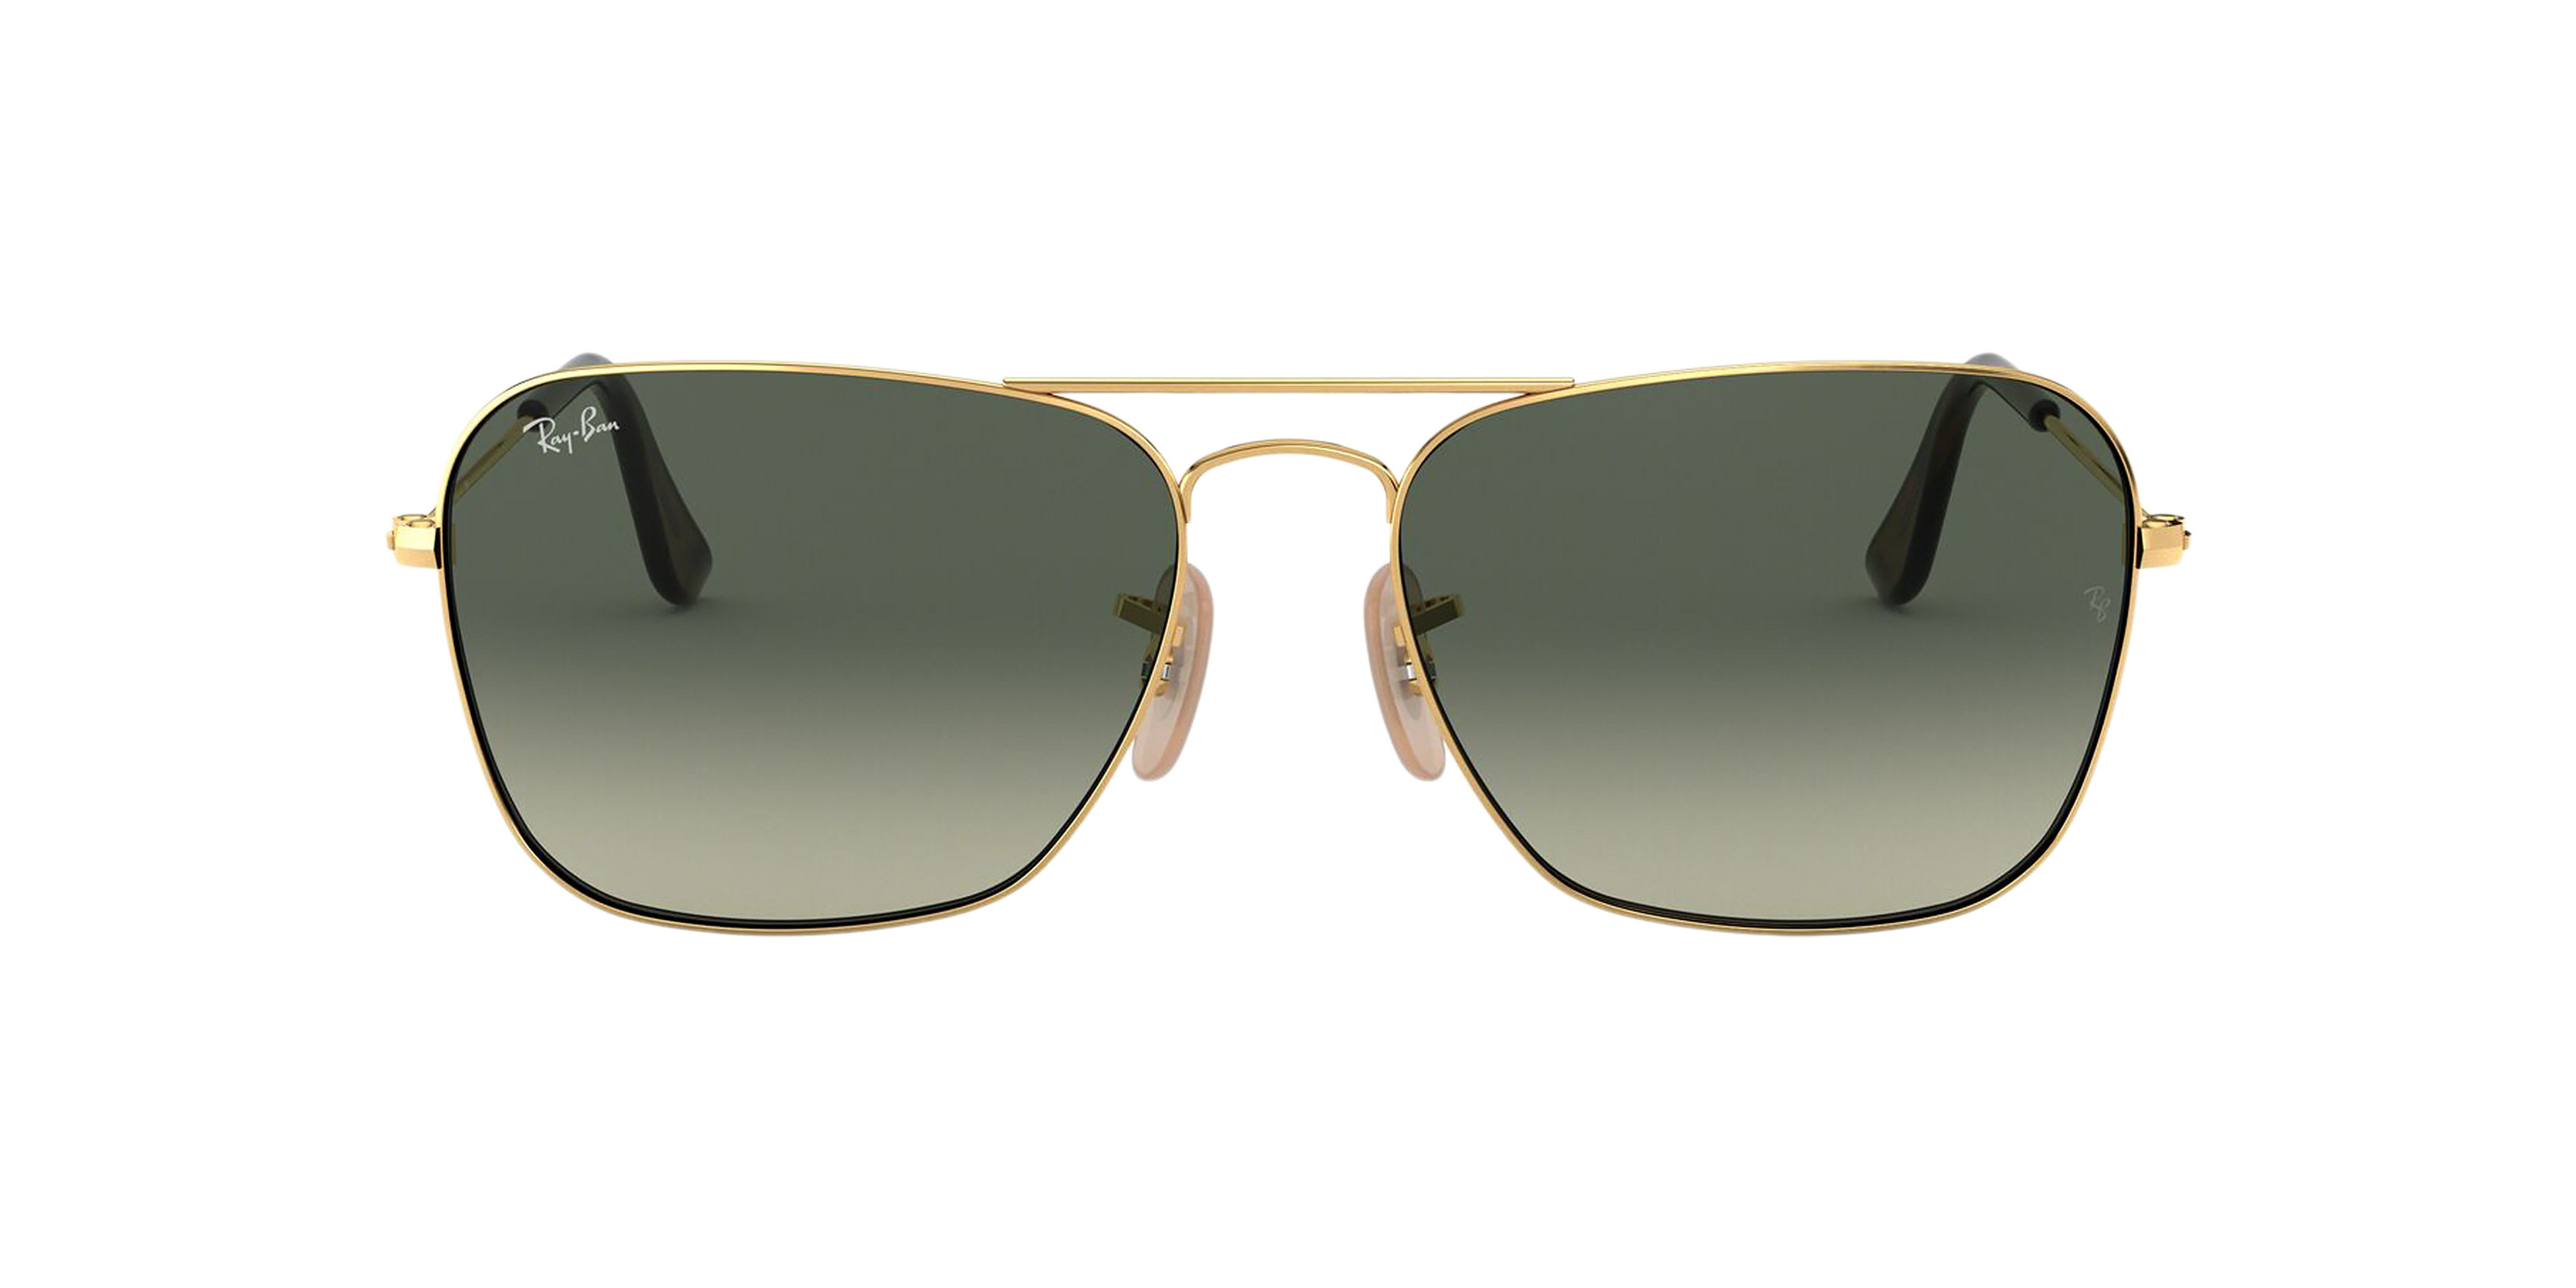 [products.image.front] Ray-Ban Caravan RB3136 181/71